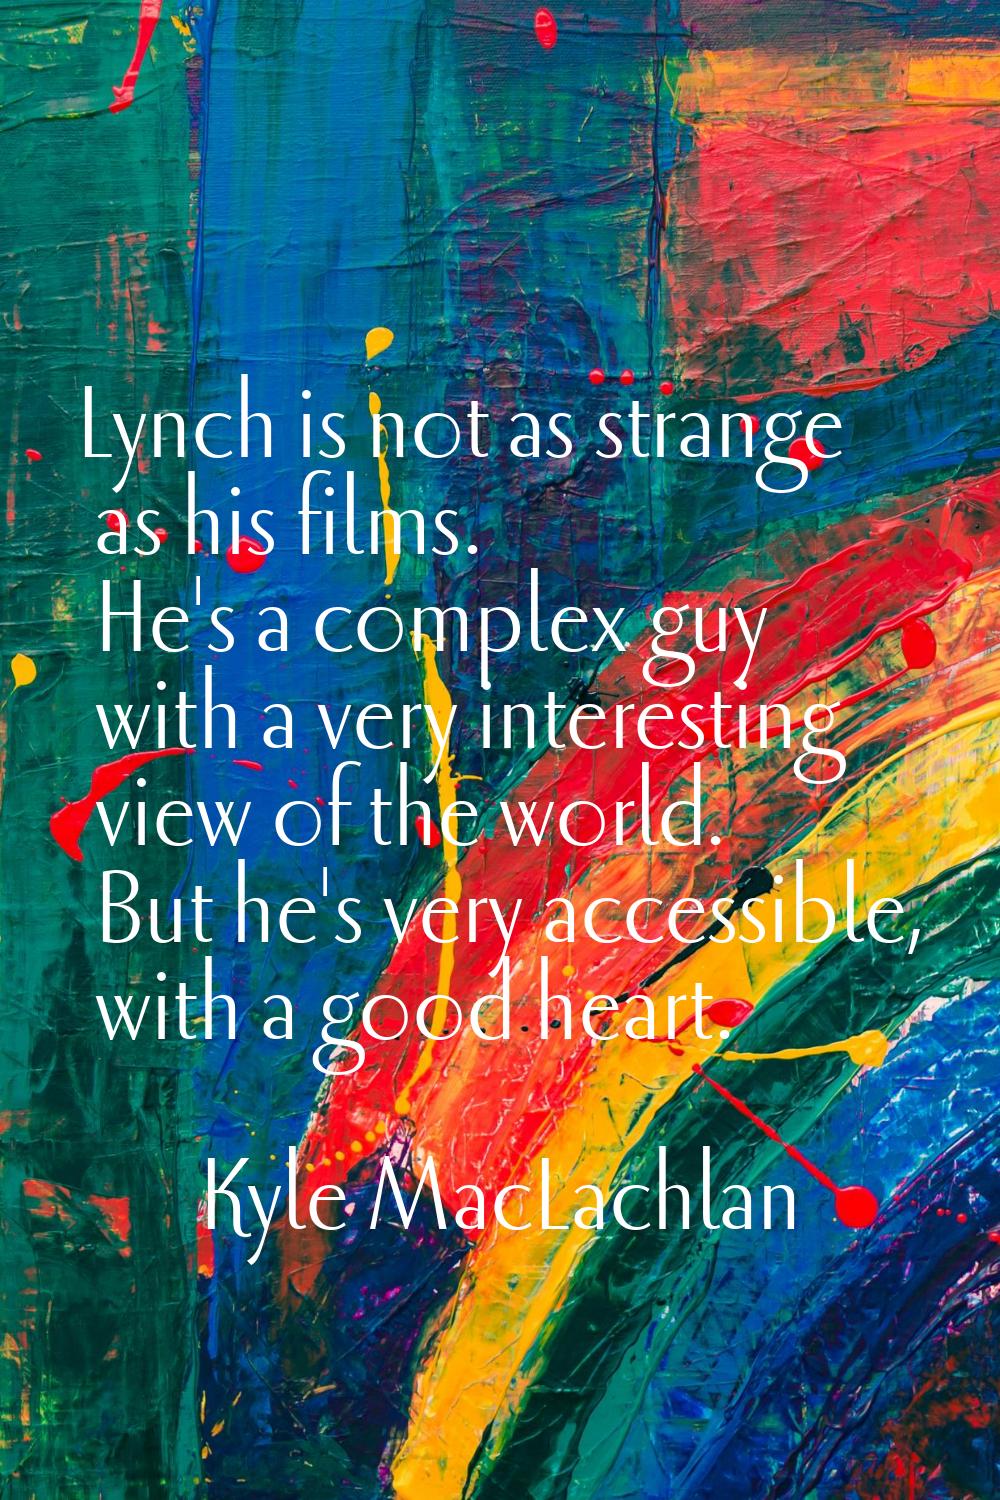 Lynch is not as strange as his films. He's a complex guy with a very interesting view of the world.